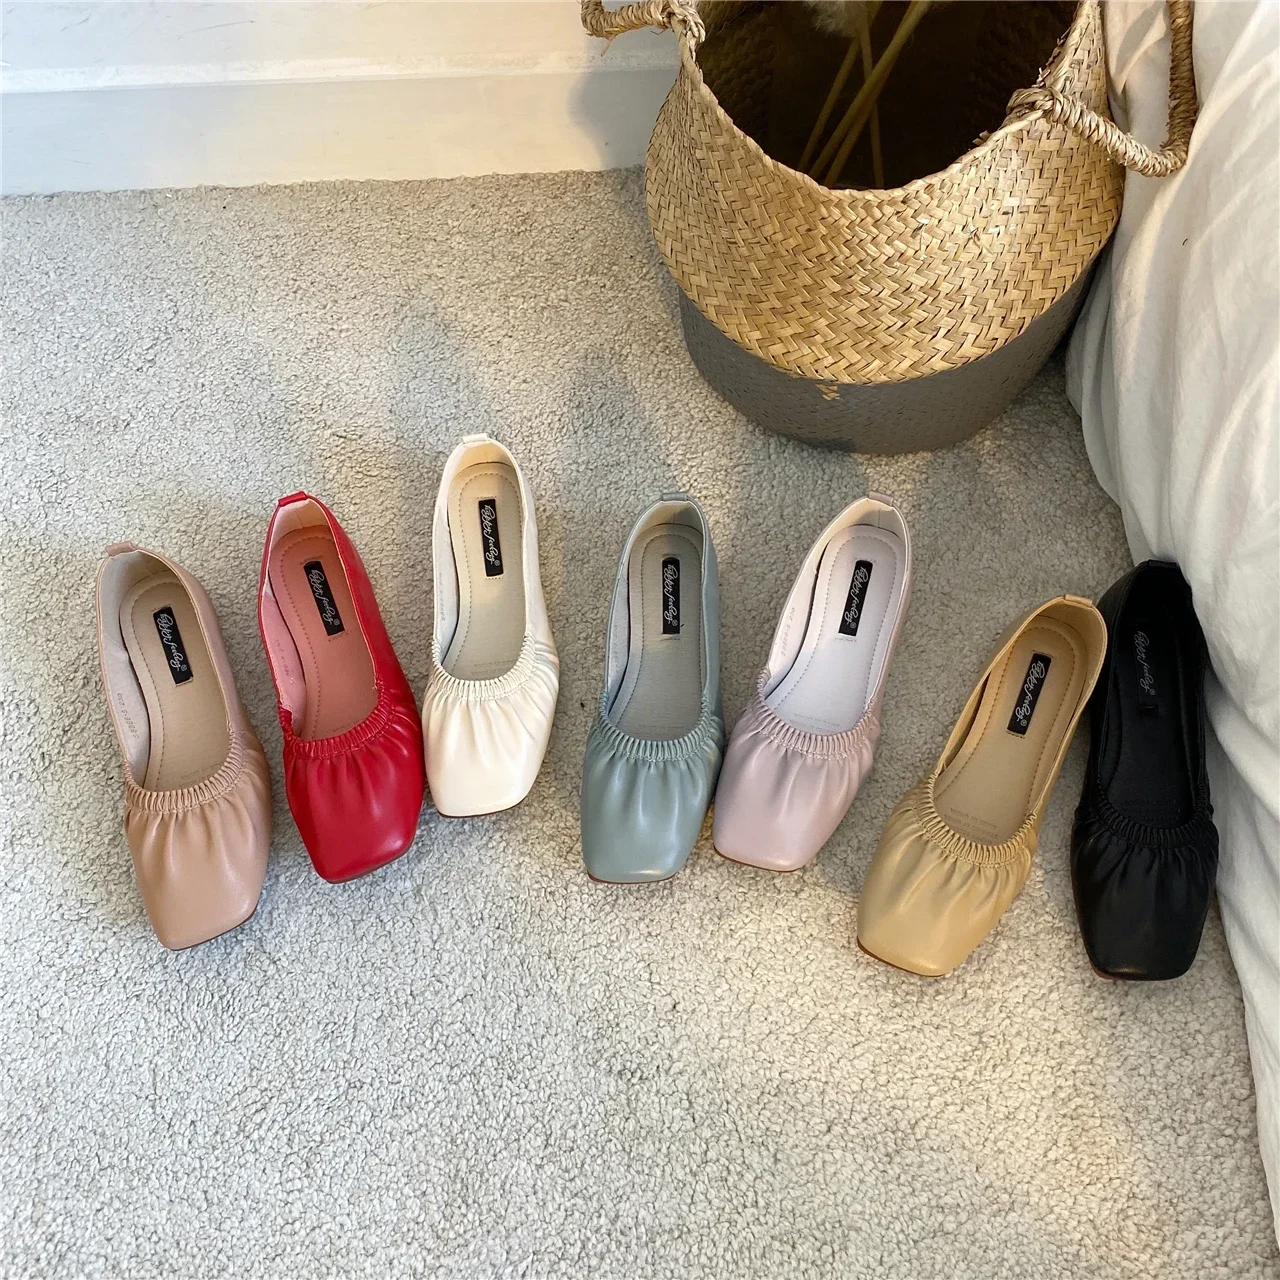 

Women Ballet Flats Korean Wrinkled Soft Sole Grandma Shoes Female Retro Square Toe Single Shoes Slip On Loafers Moccasins Muje